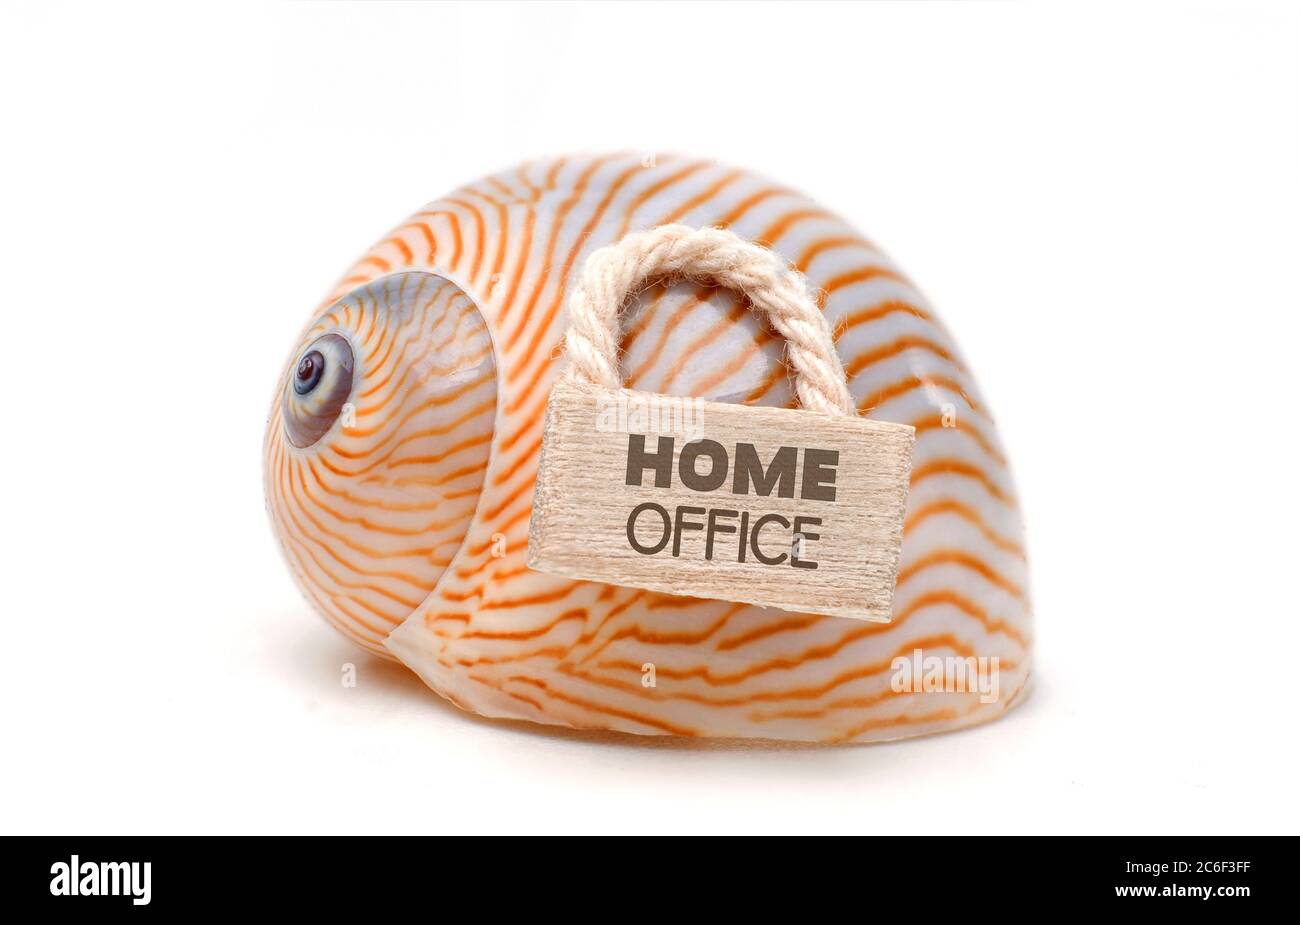 Coronavirus Home Office - snaik shell with door sign and lettering Home Office Stock Photo